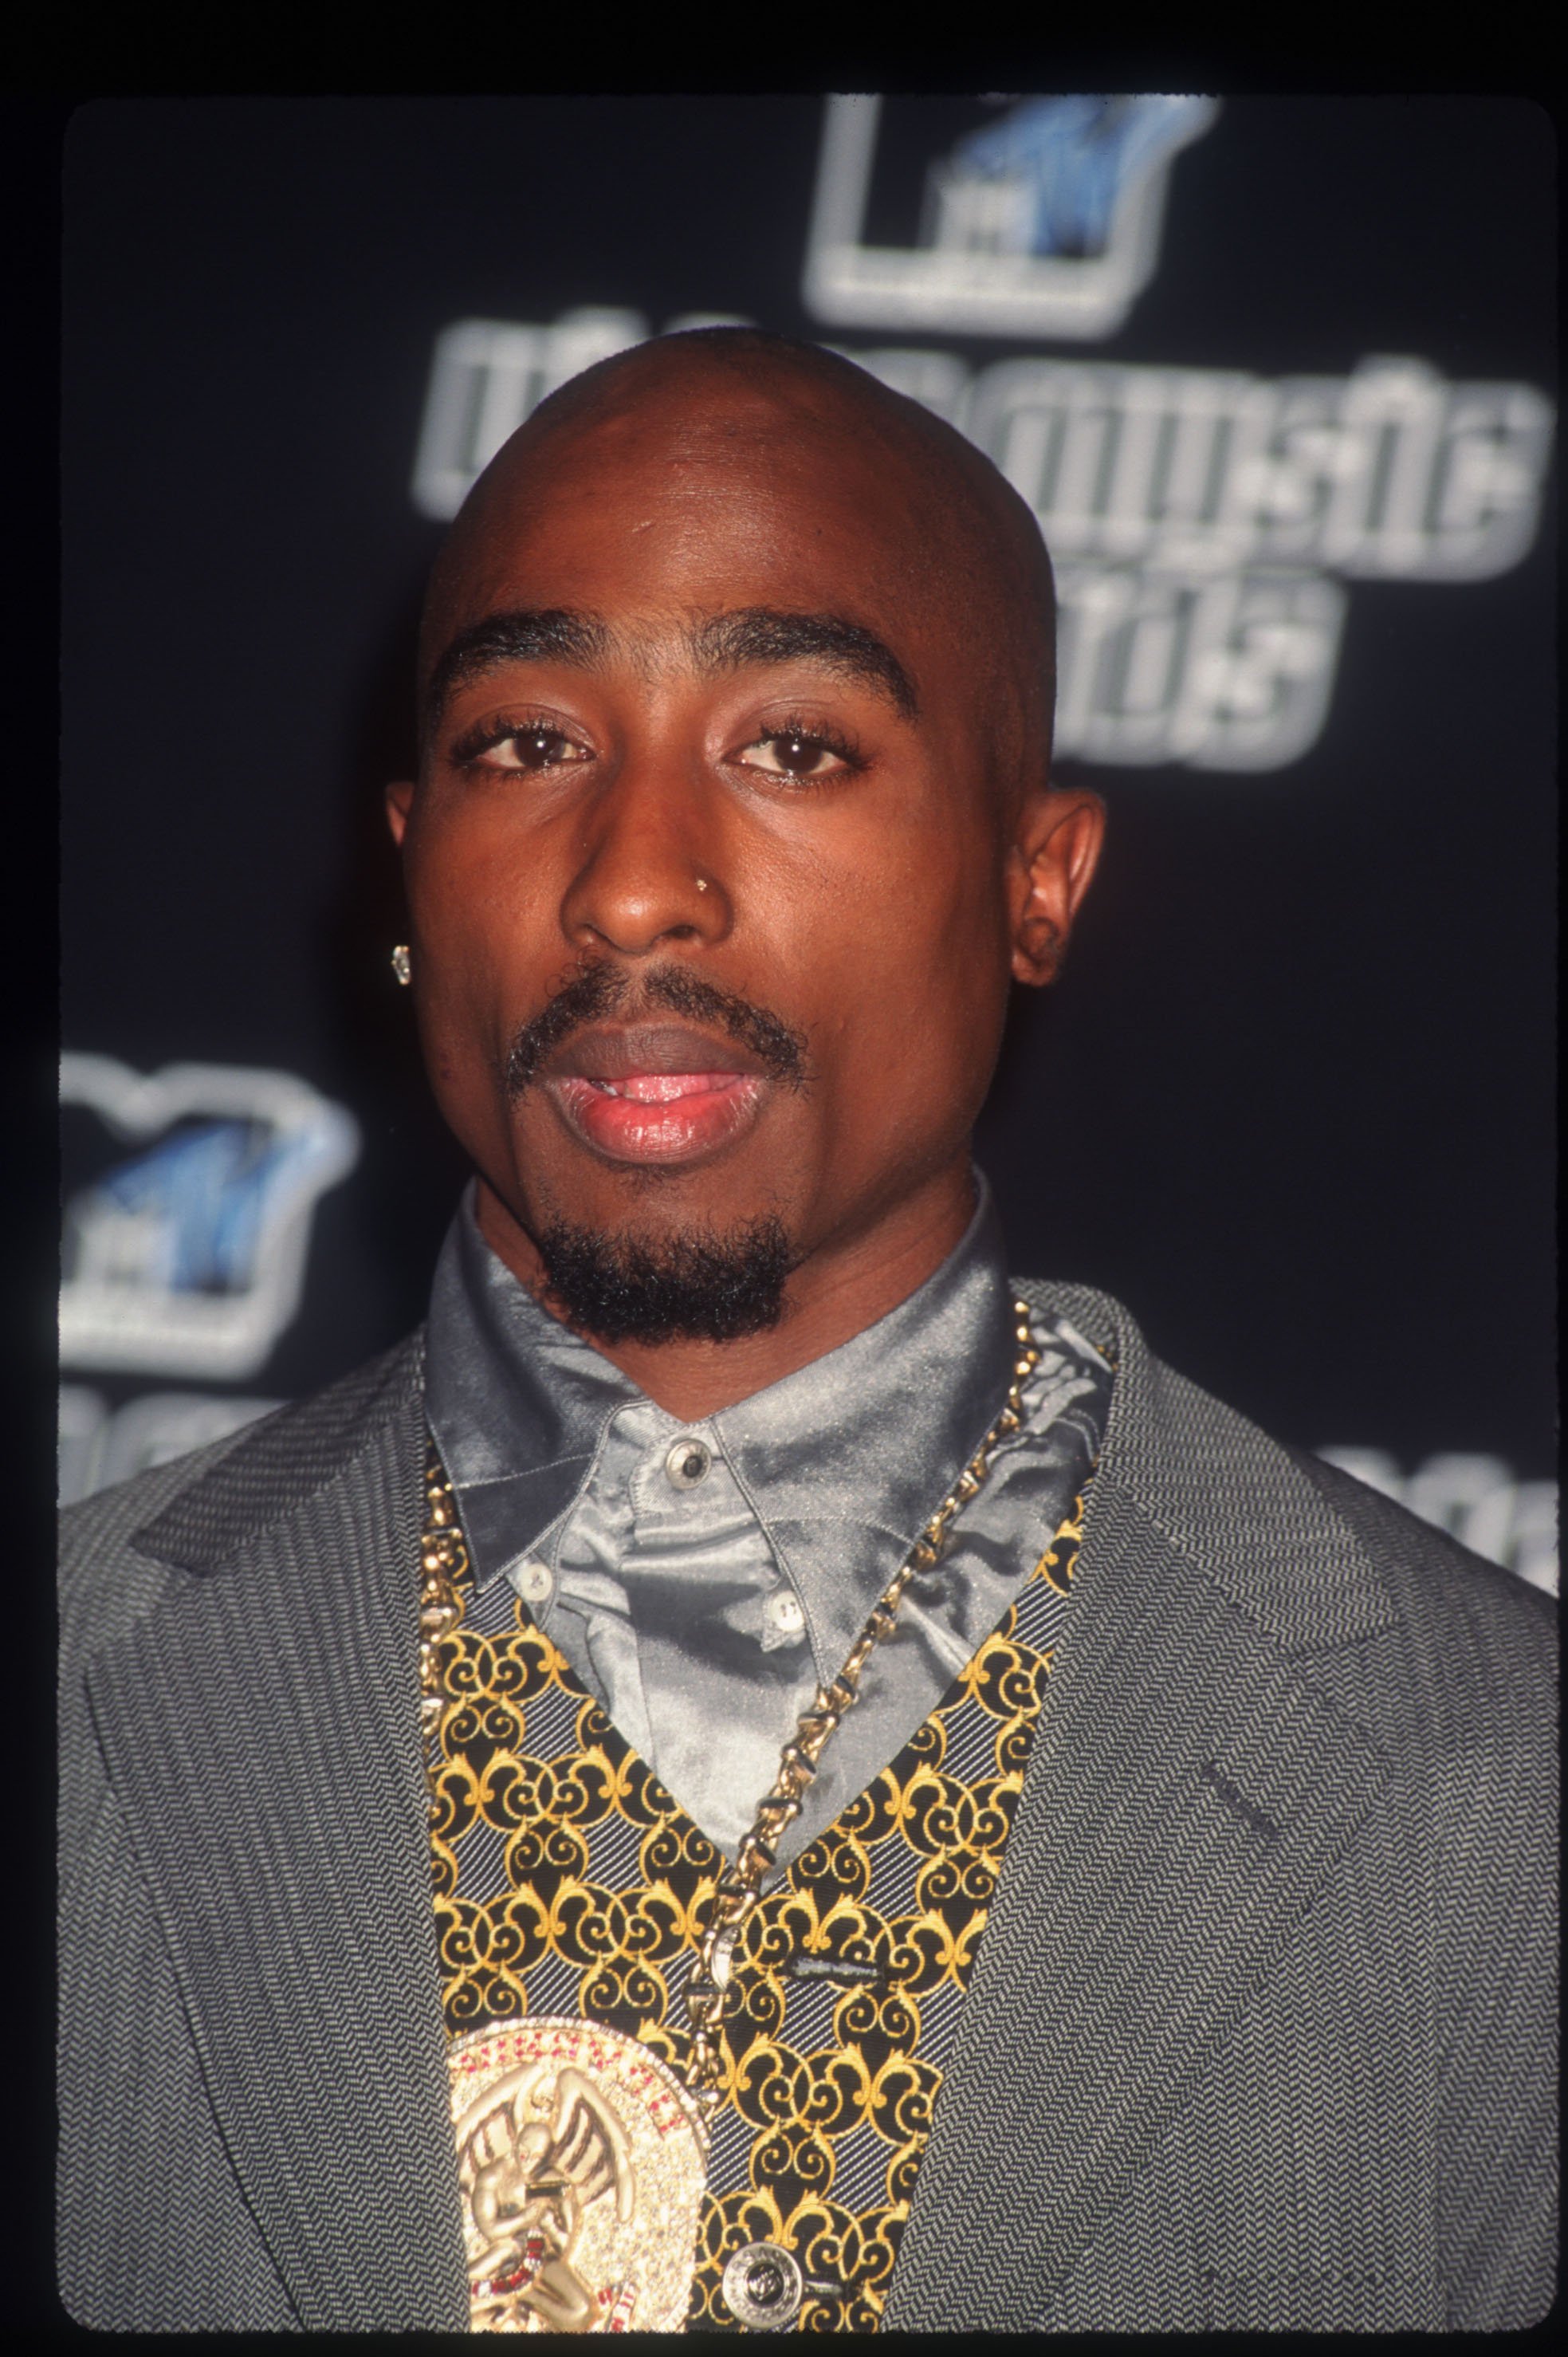 Tupac Shakur stands backstage at the MTV Video Music Awards September 4, 1996 in New York City. | Photo: GettyImages